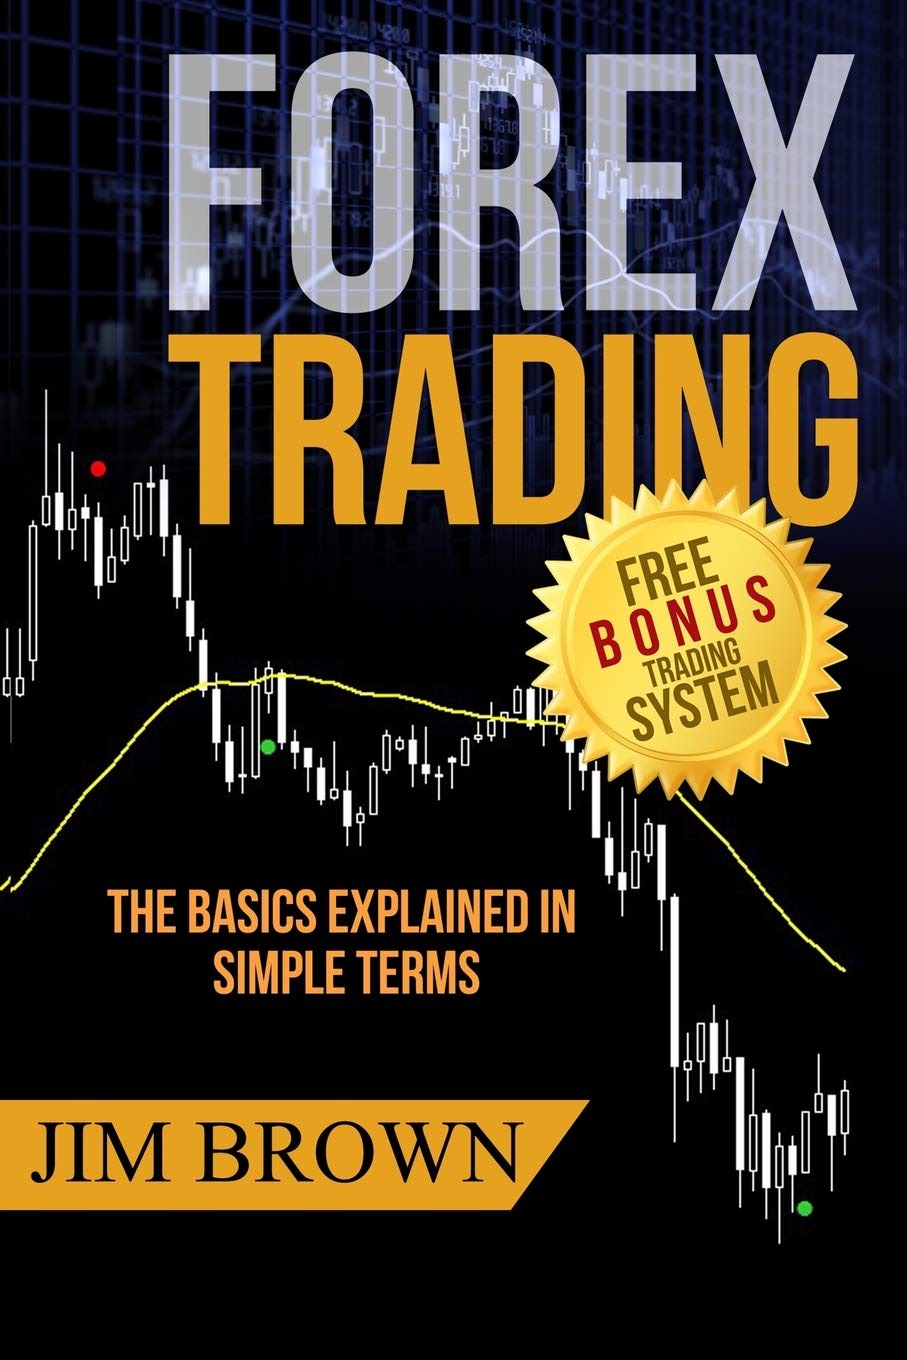 The Black Book of Forex Trading by Paul Langer